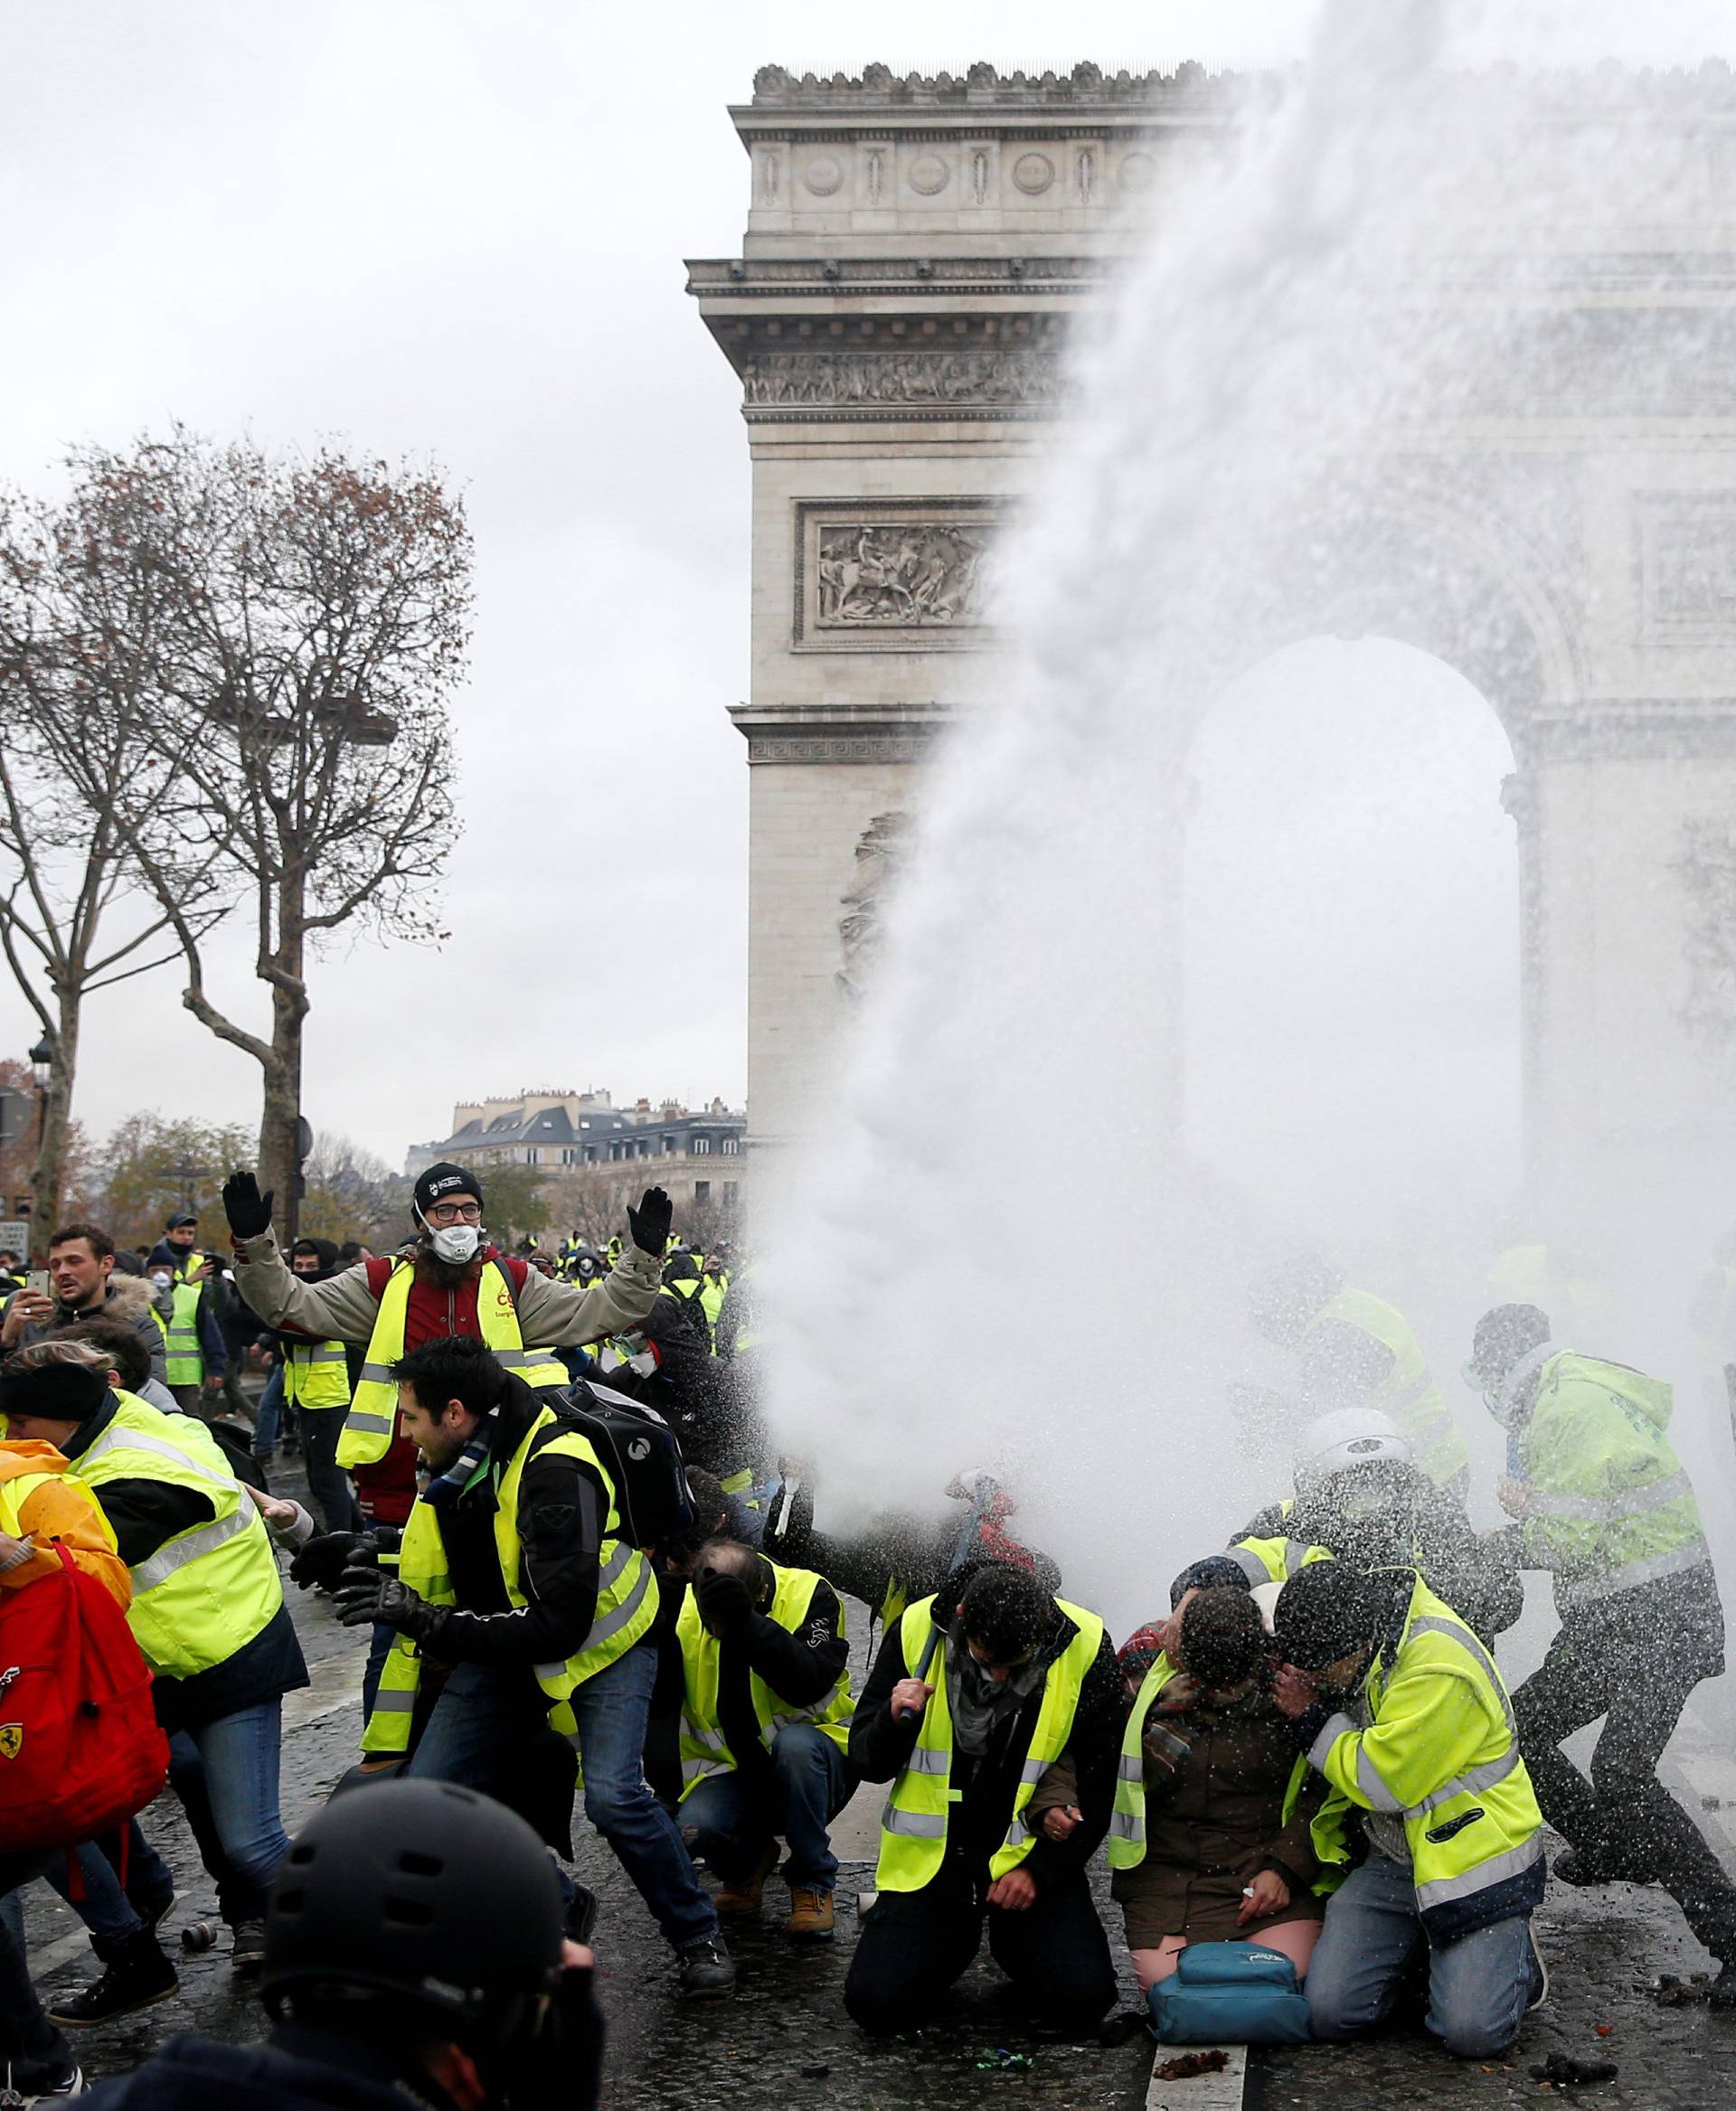 Protesters wearing yellow vests, a symbol of a French drivers' protest against higher diesel taxes,  stand up in front of a police water canon during clashes near the Arc de Triomphe in Paris